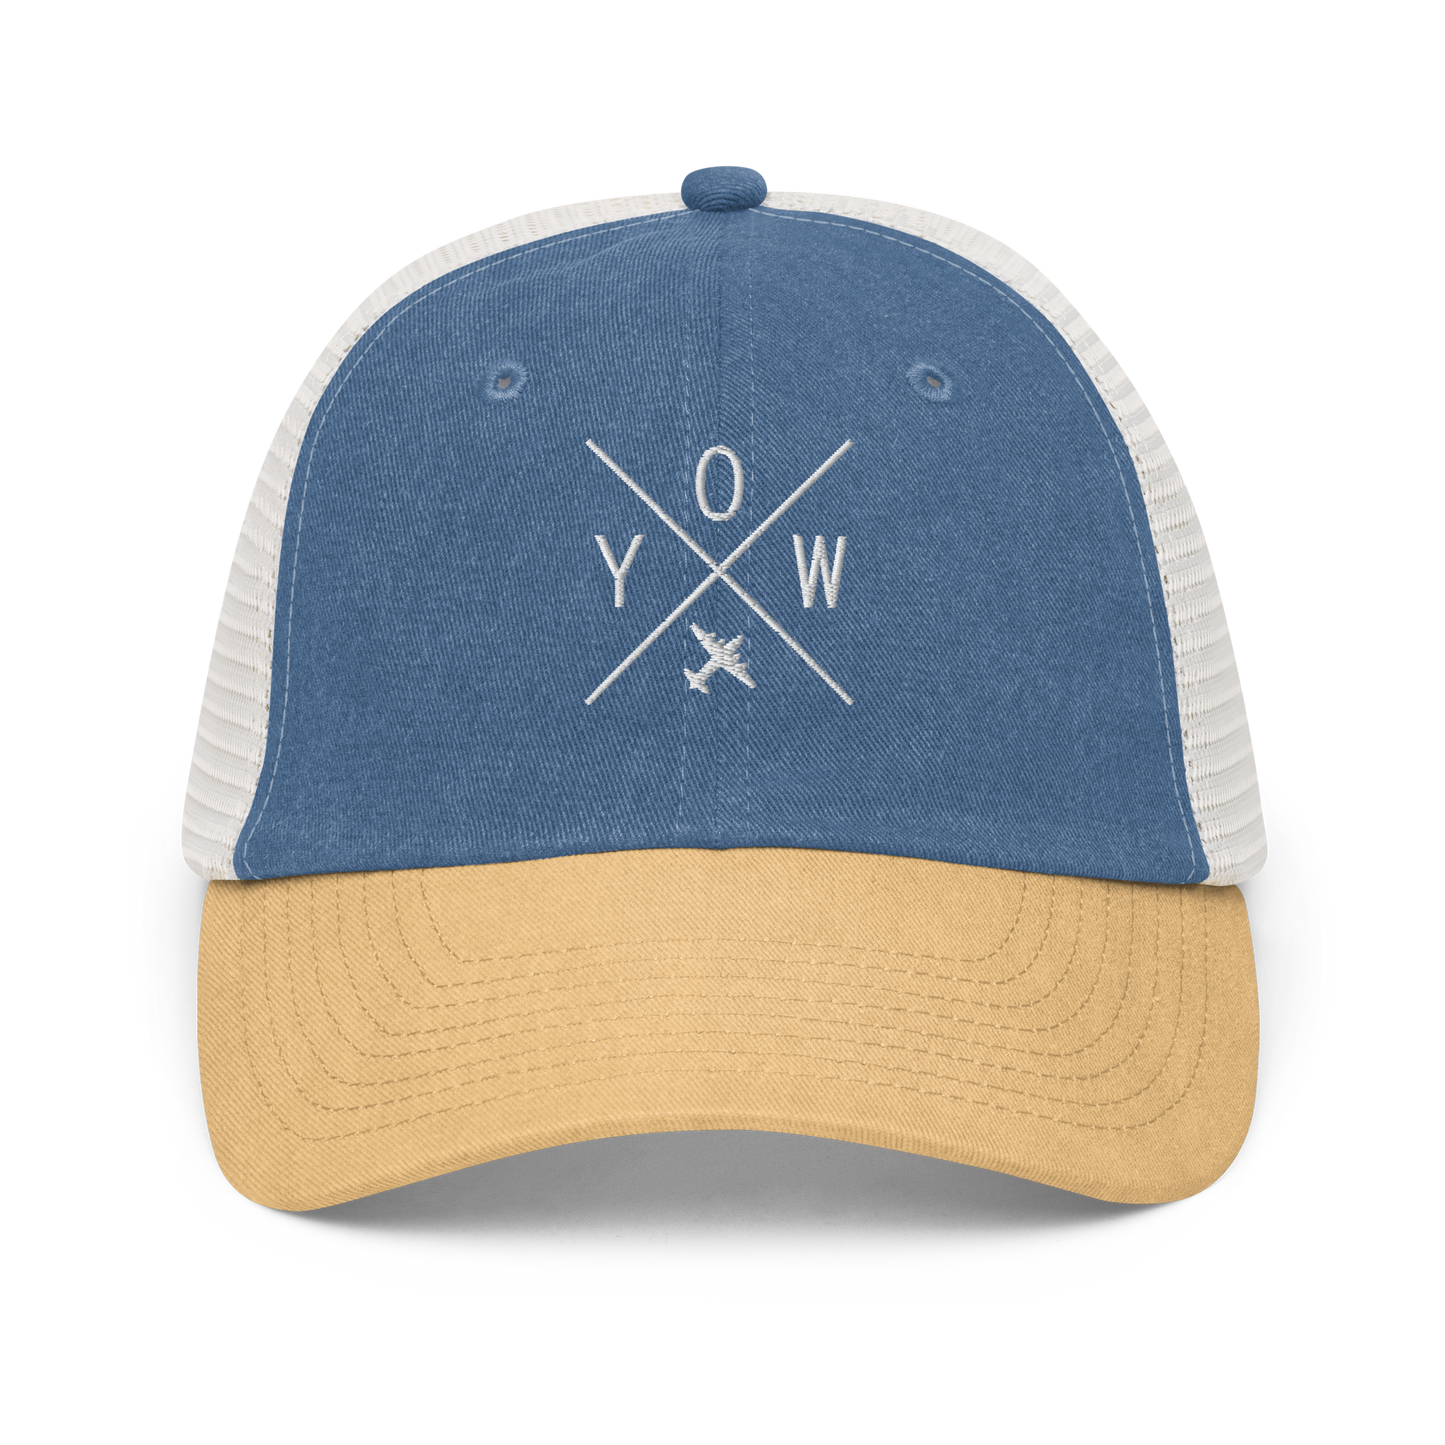 YHM Designs - YOW Ottawa Pigment-Dyed Trucker Cap - Crossed-X Design with Airport Code and Vintage Propliner - White Embroidery - Image 01